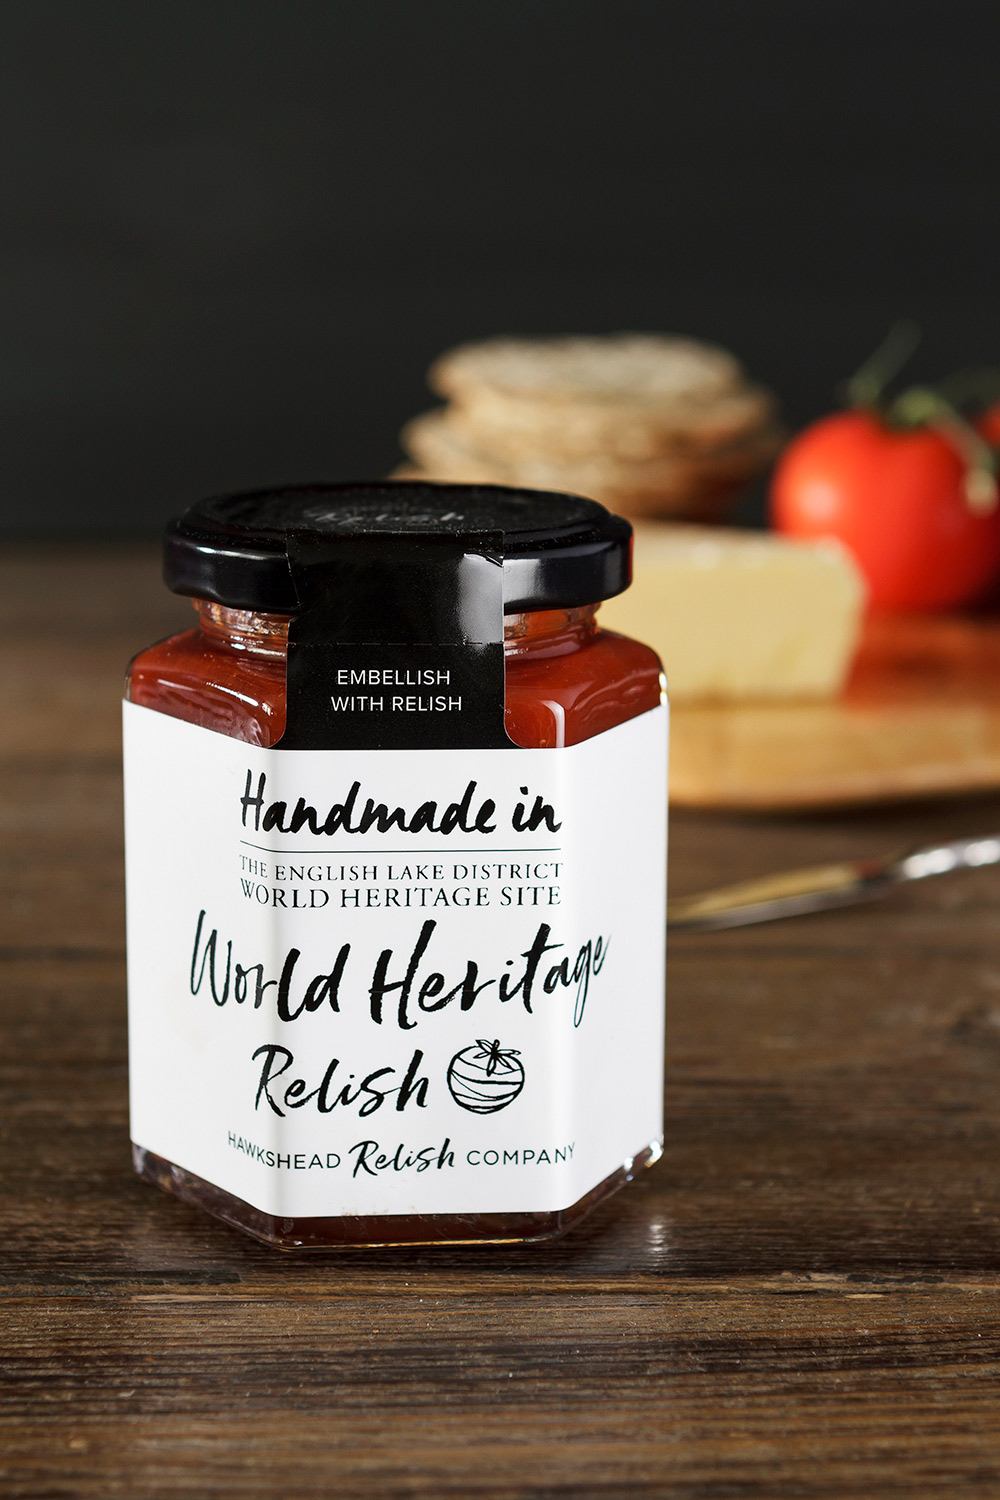 still life product photography cumbria Kendal commercial photographer lucy barden